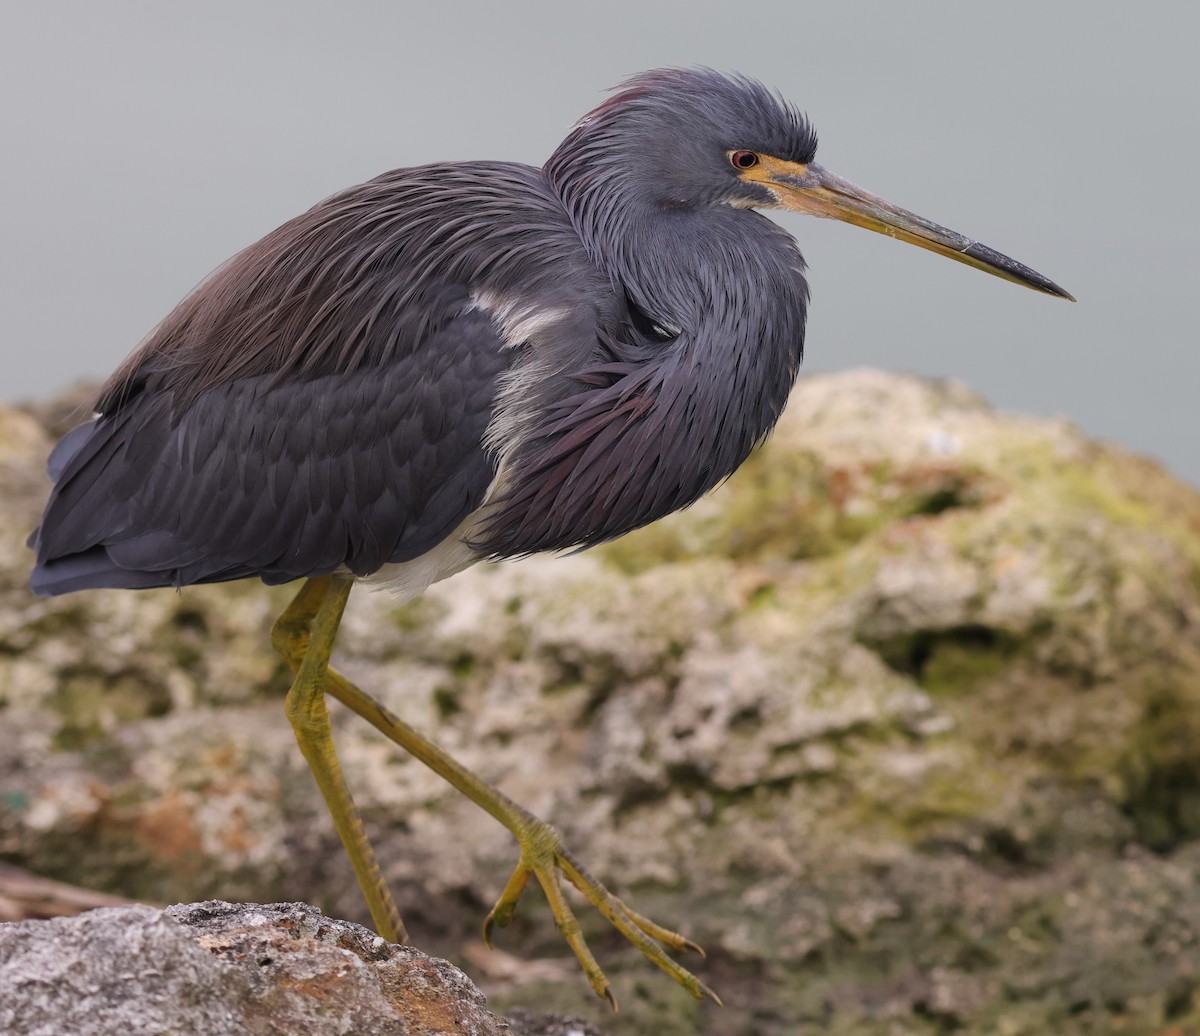 Tricolored heron searching for meal at Hogeye Pathway